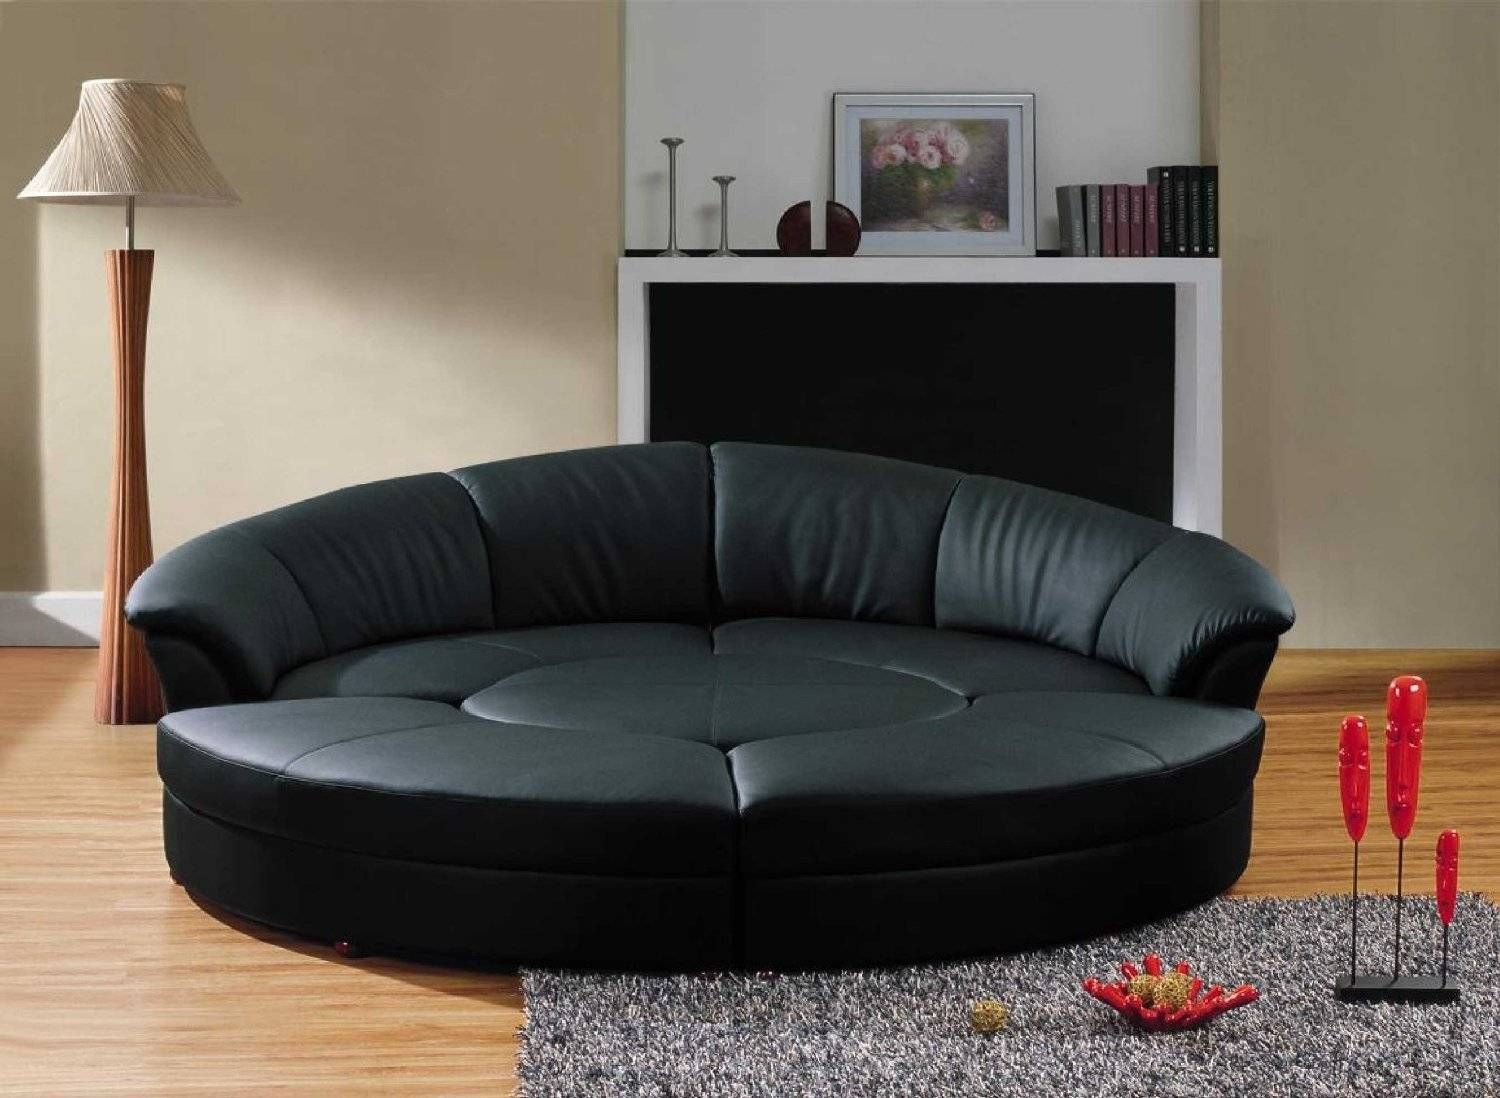 Clever Ideas Round Sofa Chair Round Swivel Sofa Chair | Living Room Inside Round Swivel Sofa Chairs (View 18 of 30)